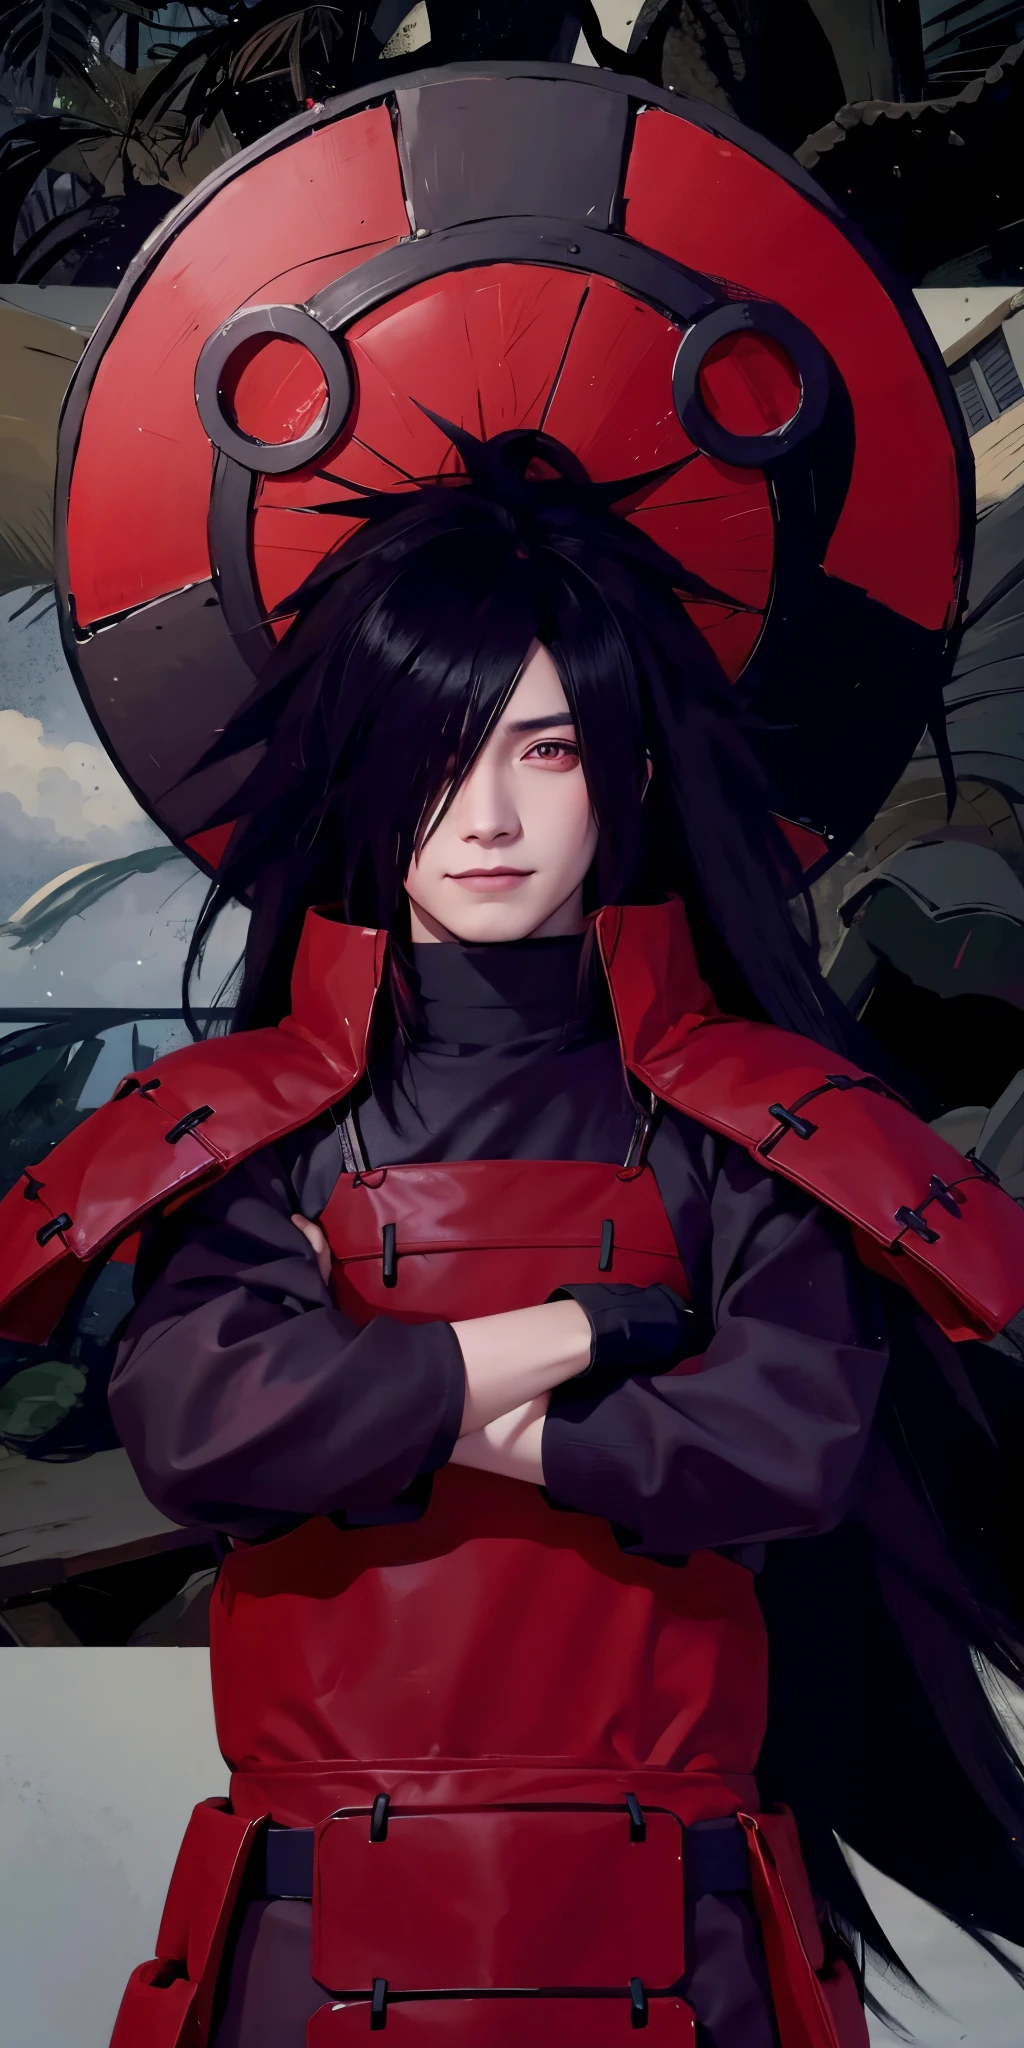 1male, uchiha madara in anime naruto, long hair , black hair, red eyes, handsome, smile, red clothes, realistic clothes, detail clothes, beach city background, ultra detail, realistic